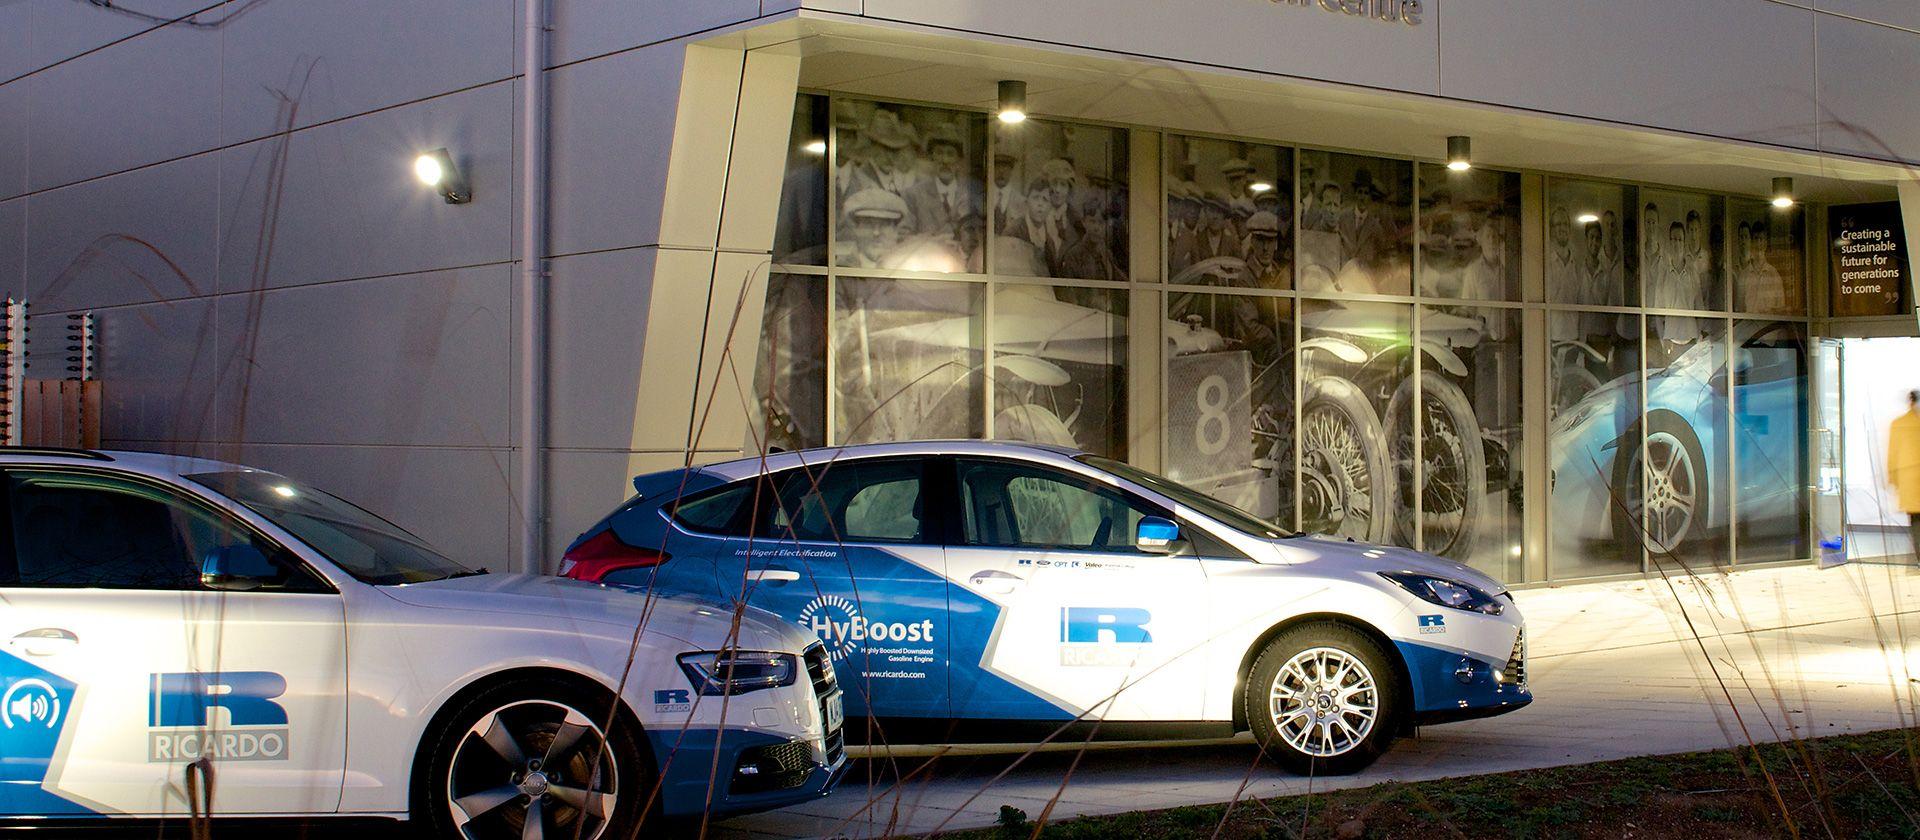 Two Ricardo branded cars infront of an innovation centre.